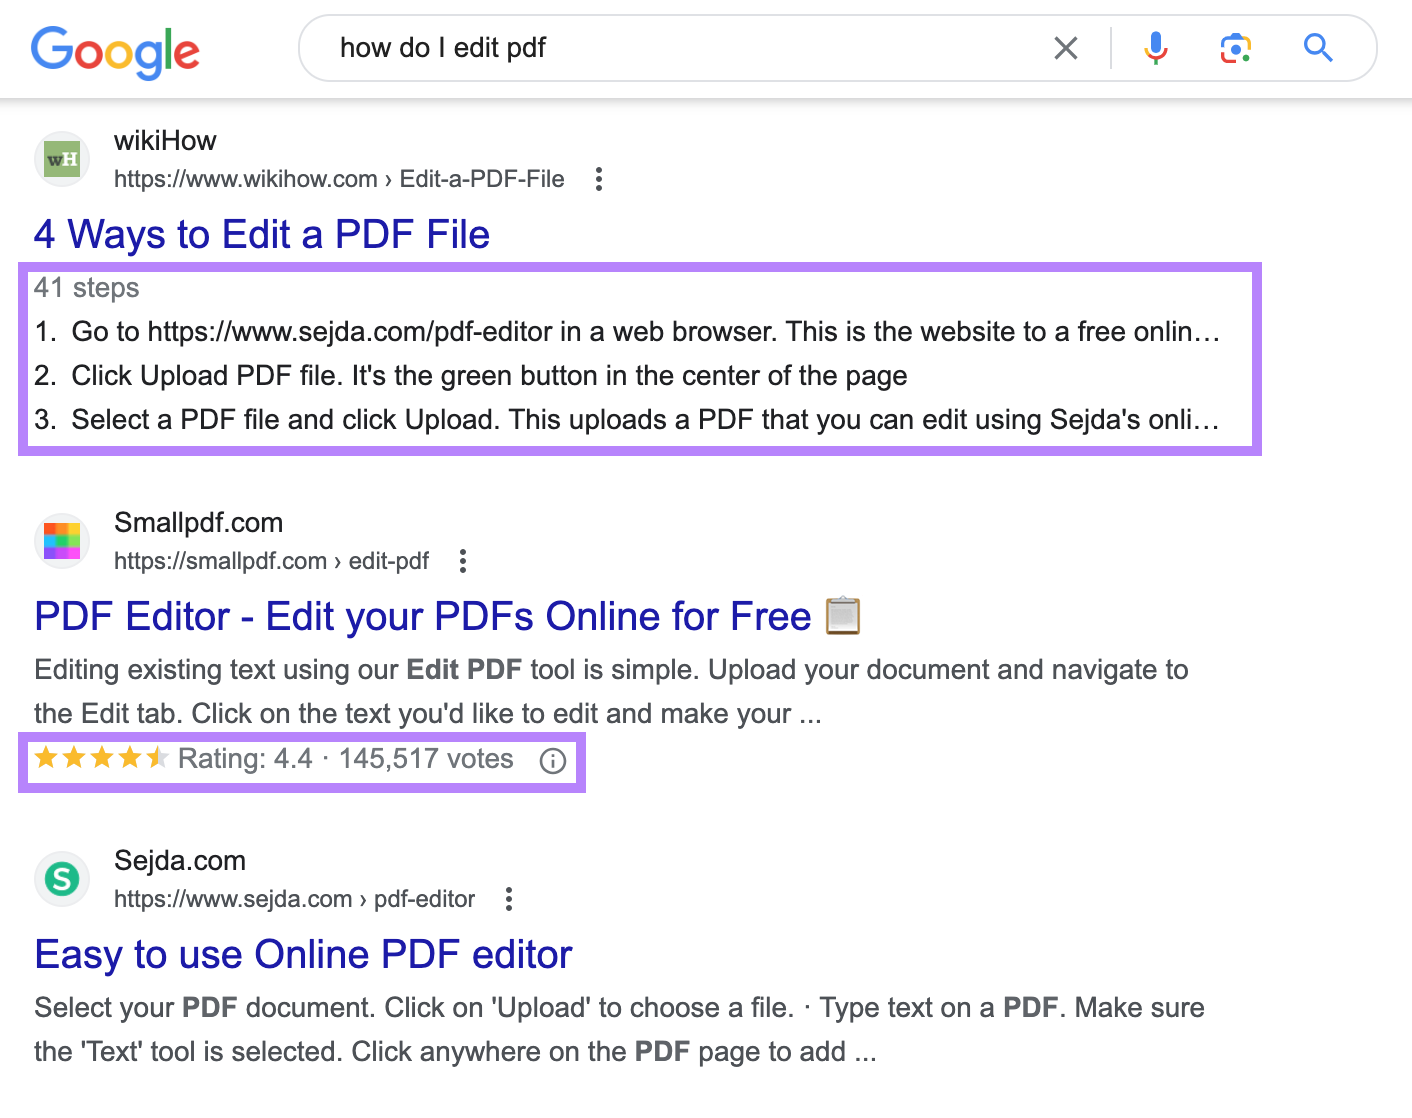 an example of different SERP features in Google SERP for "how do i edit pdf"